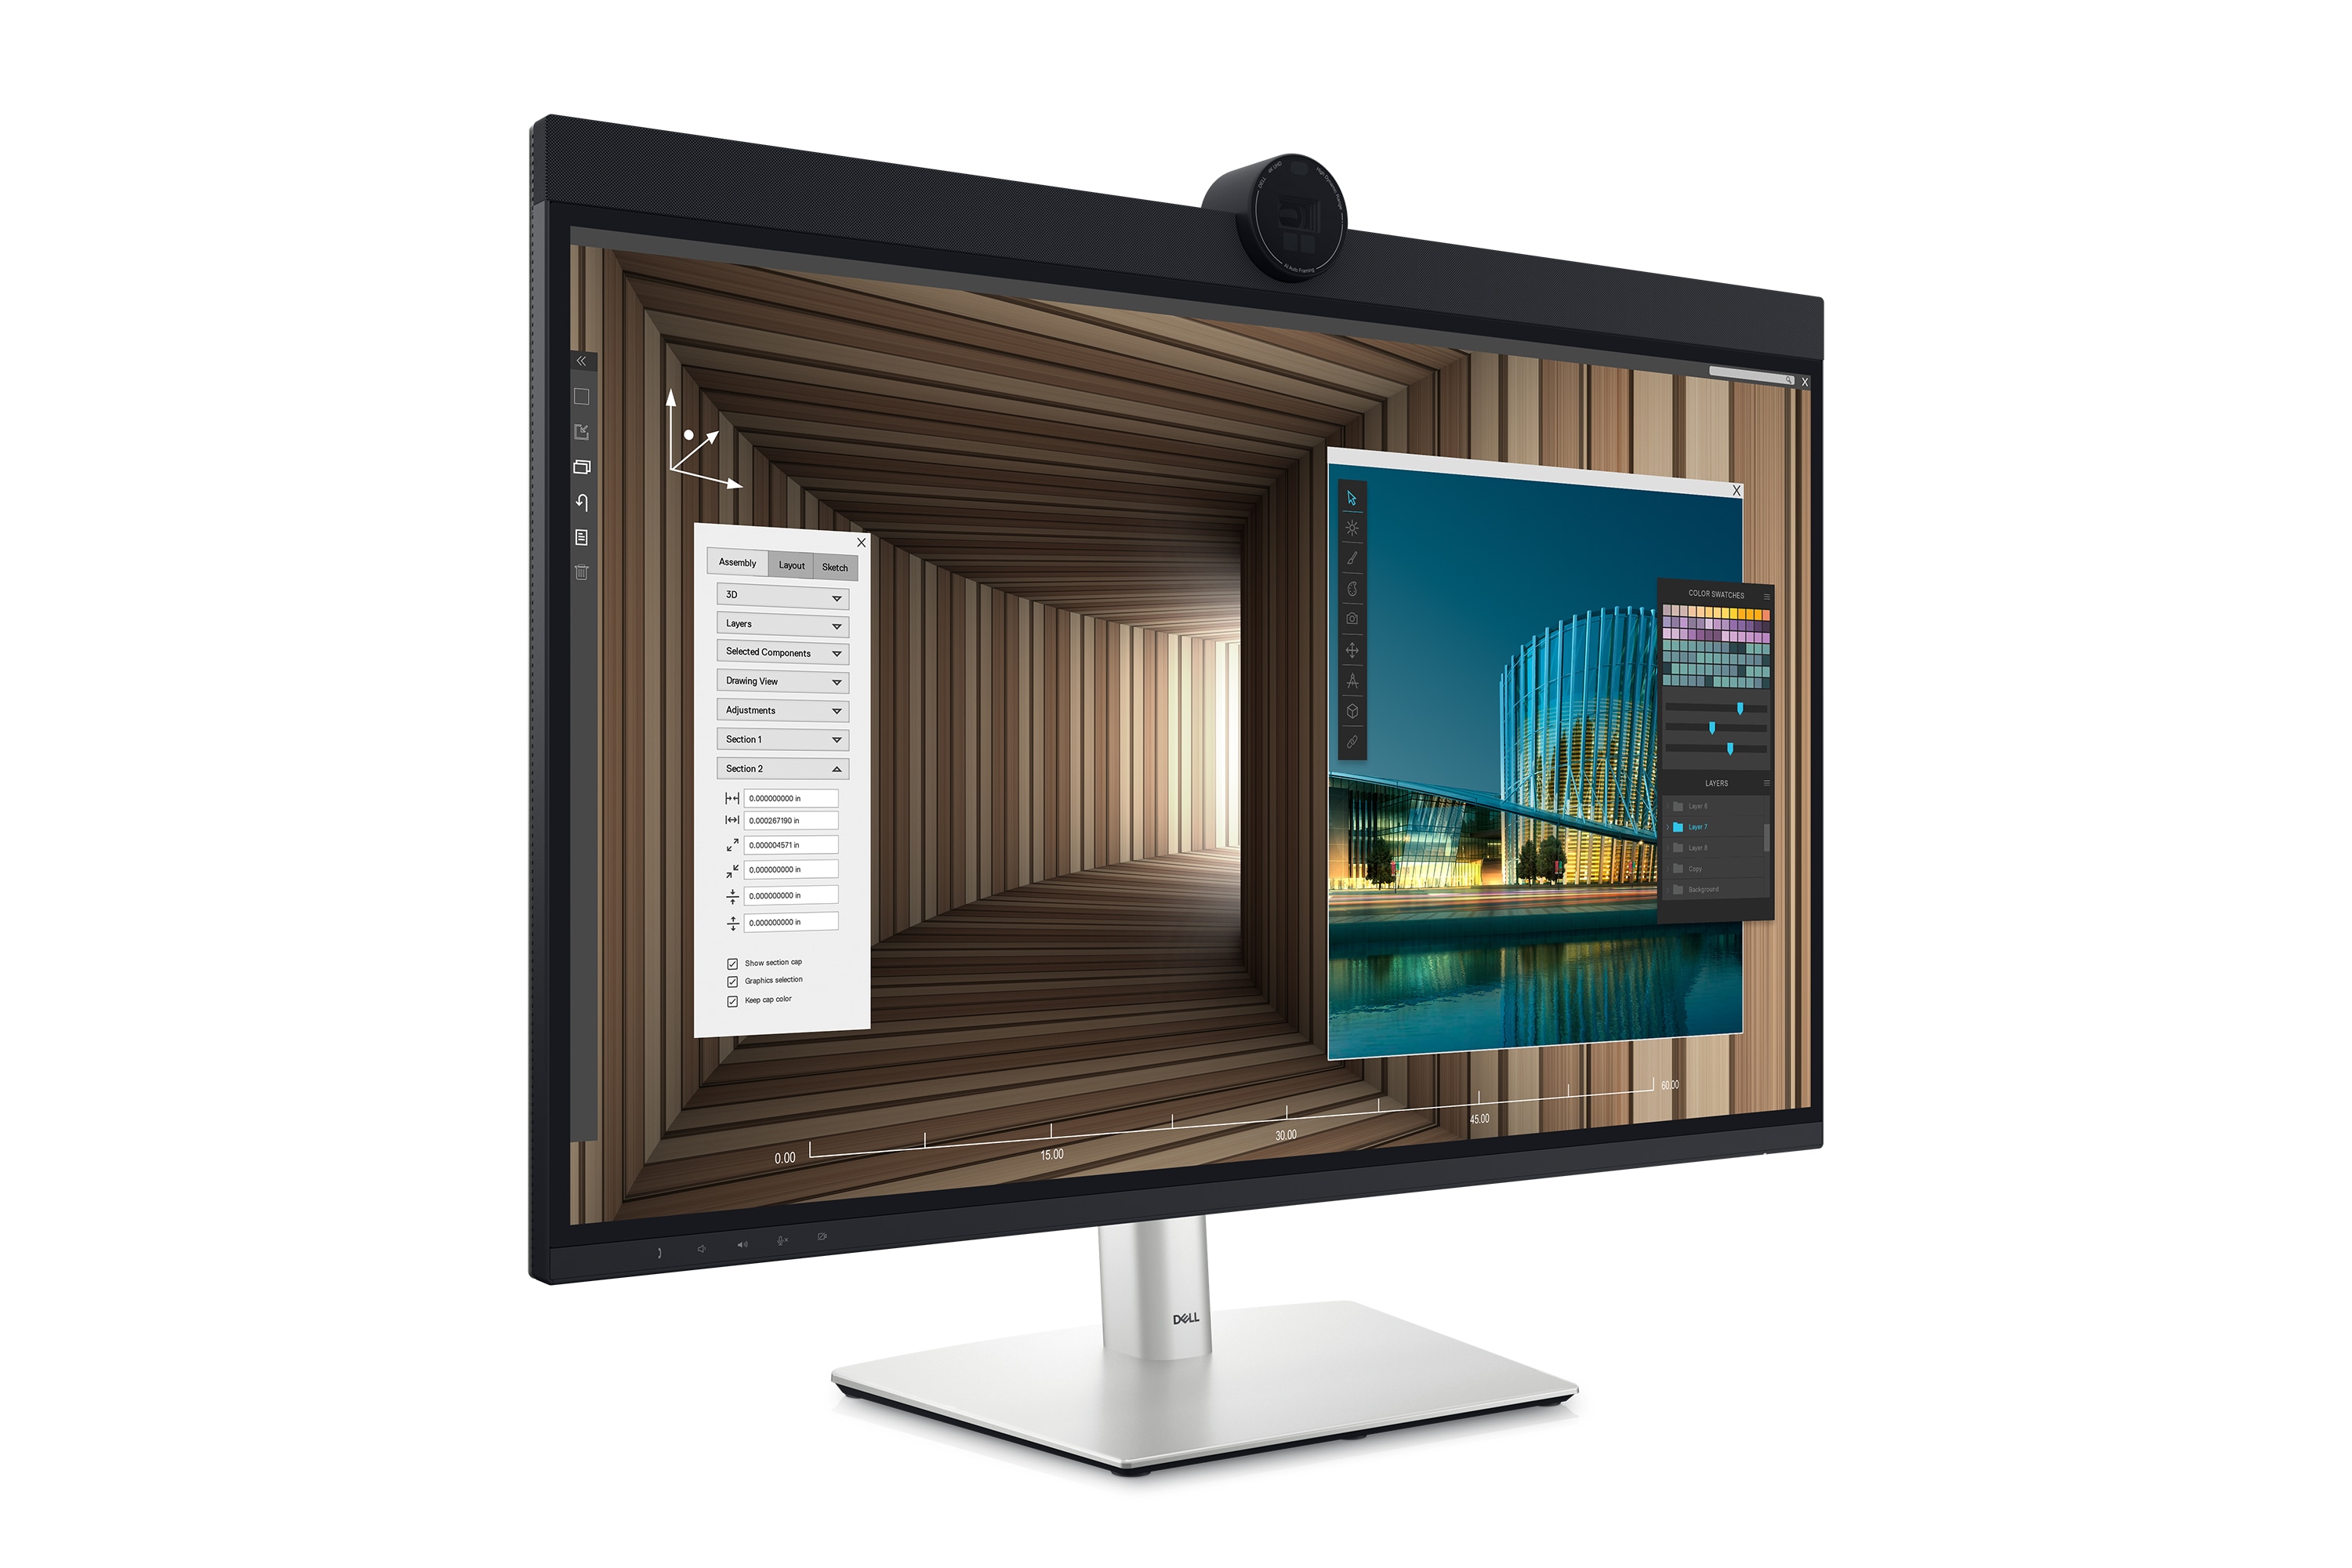 Dell Unveils New 4K, Color-Accurate Monitors Using LG's IPS Black Tech